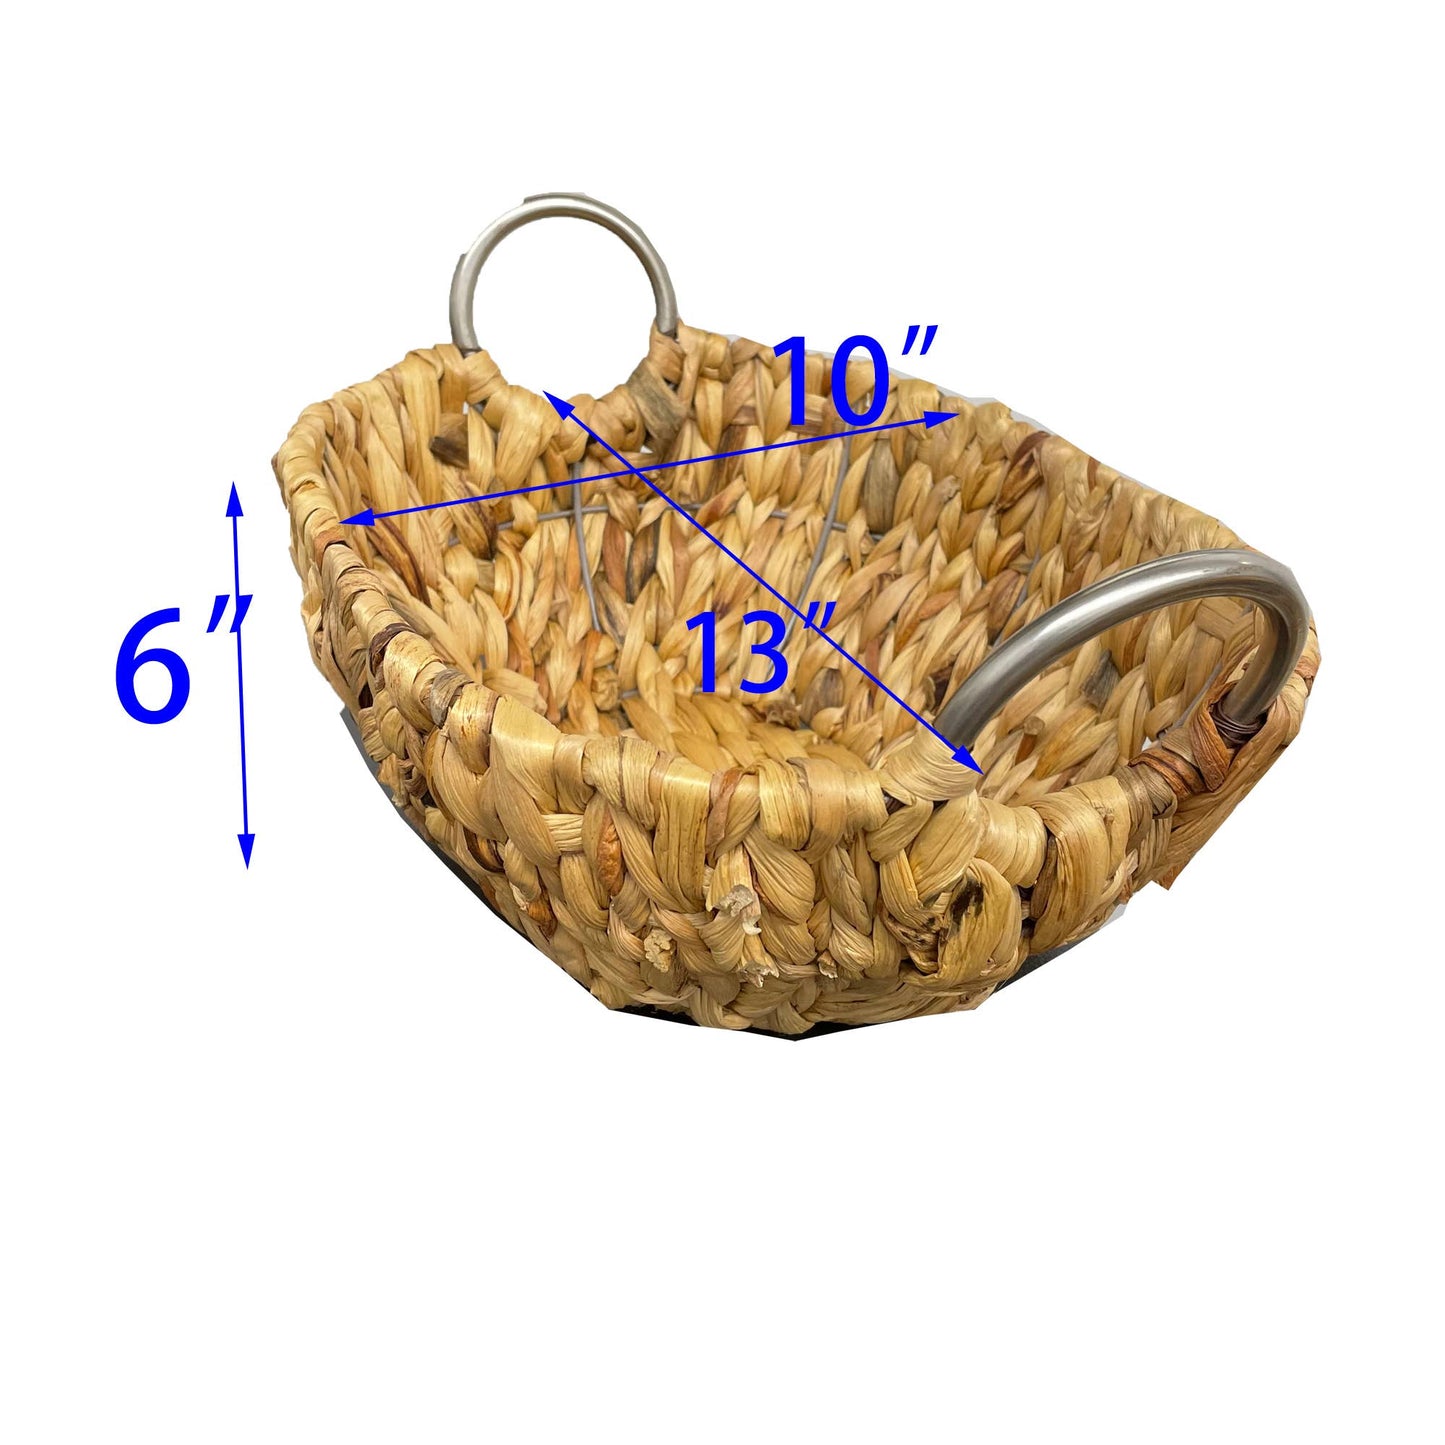 Oval Seagrass Basket 13" with Metal round handle